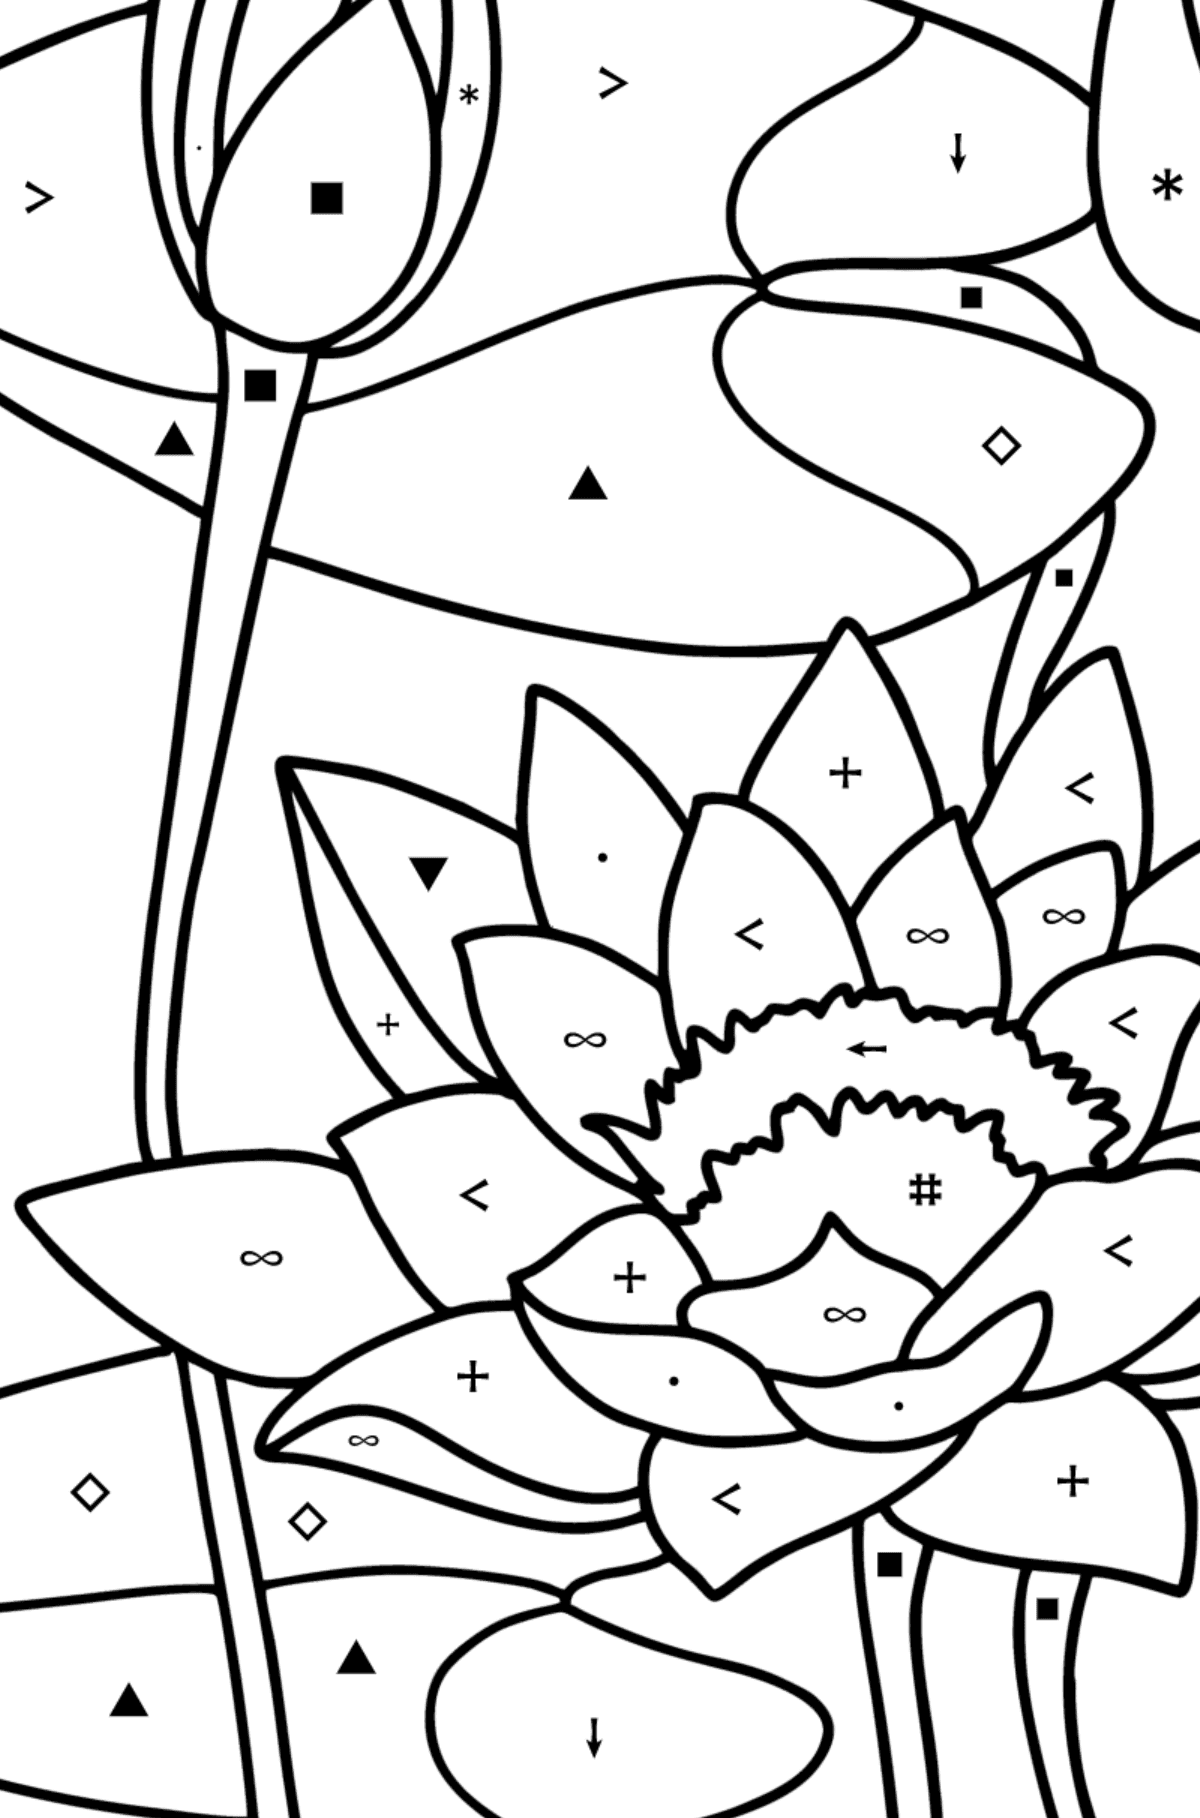 Water lily coloring page - Coloring by Symbols for Kids